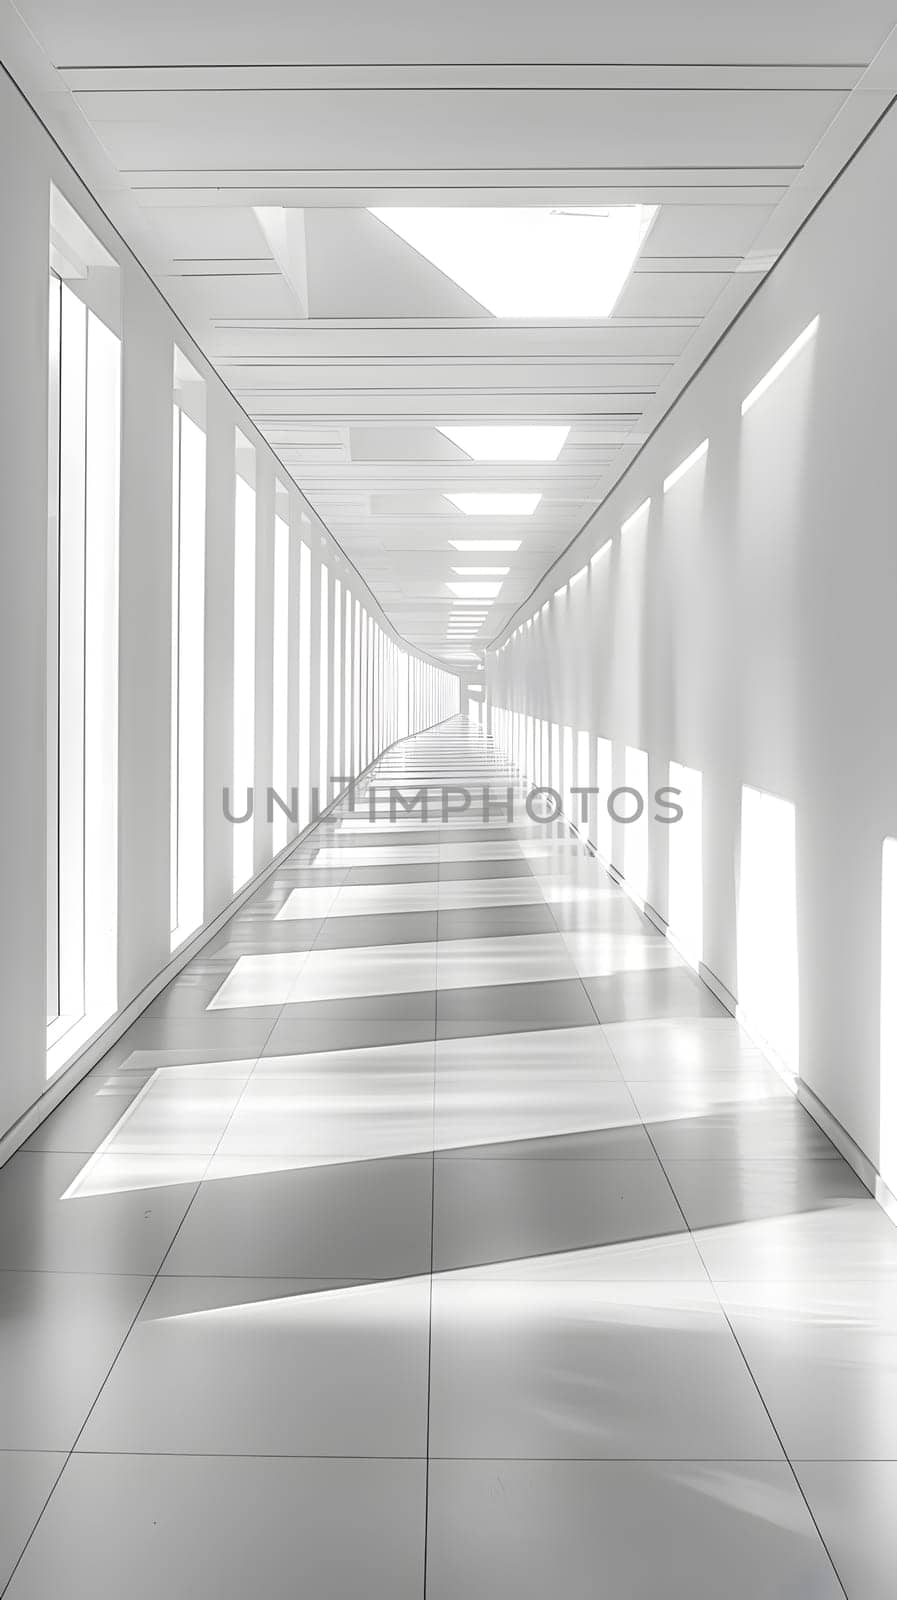 a long white hallway with lots of windows and light coming through the ceiling by Nadtochiy